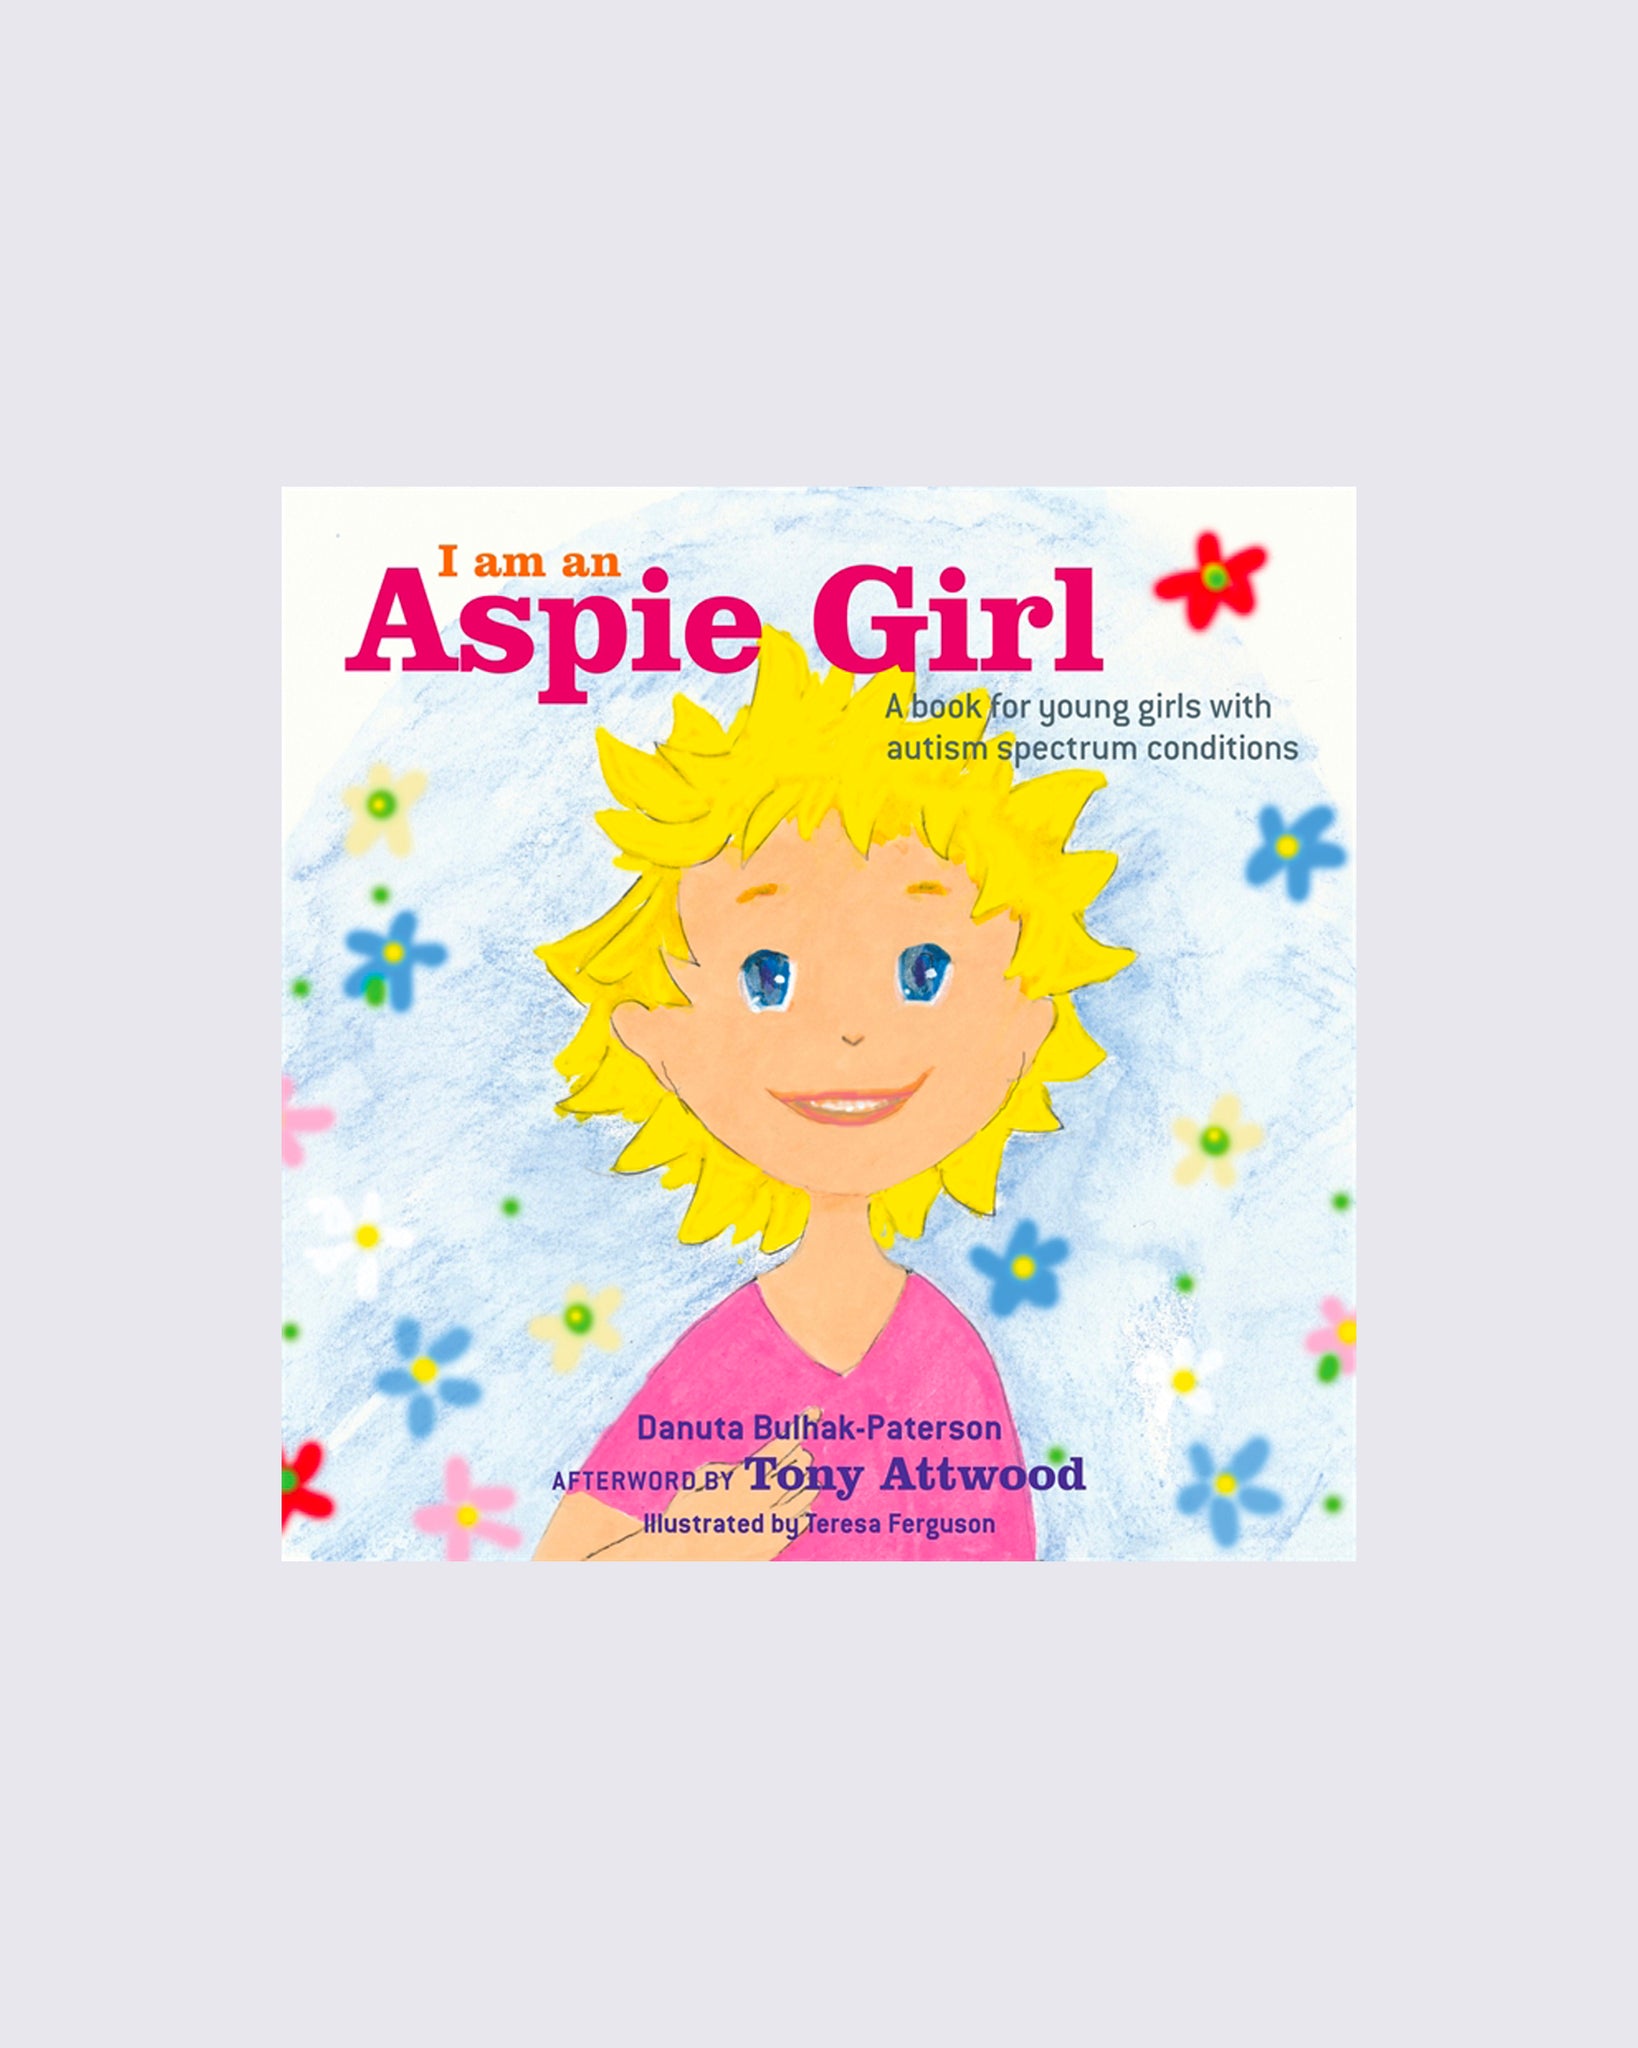 I am an Aspie Girl: A book for young girls with autism